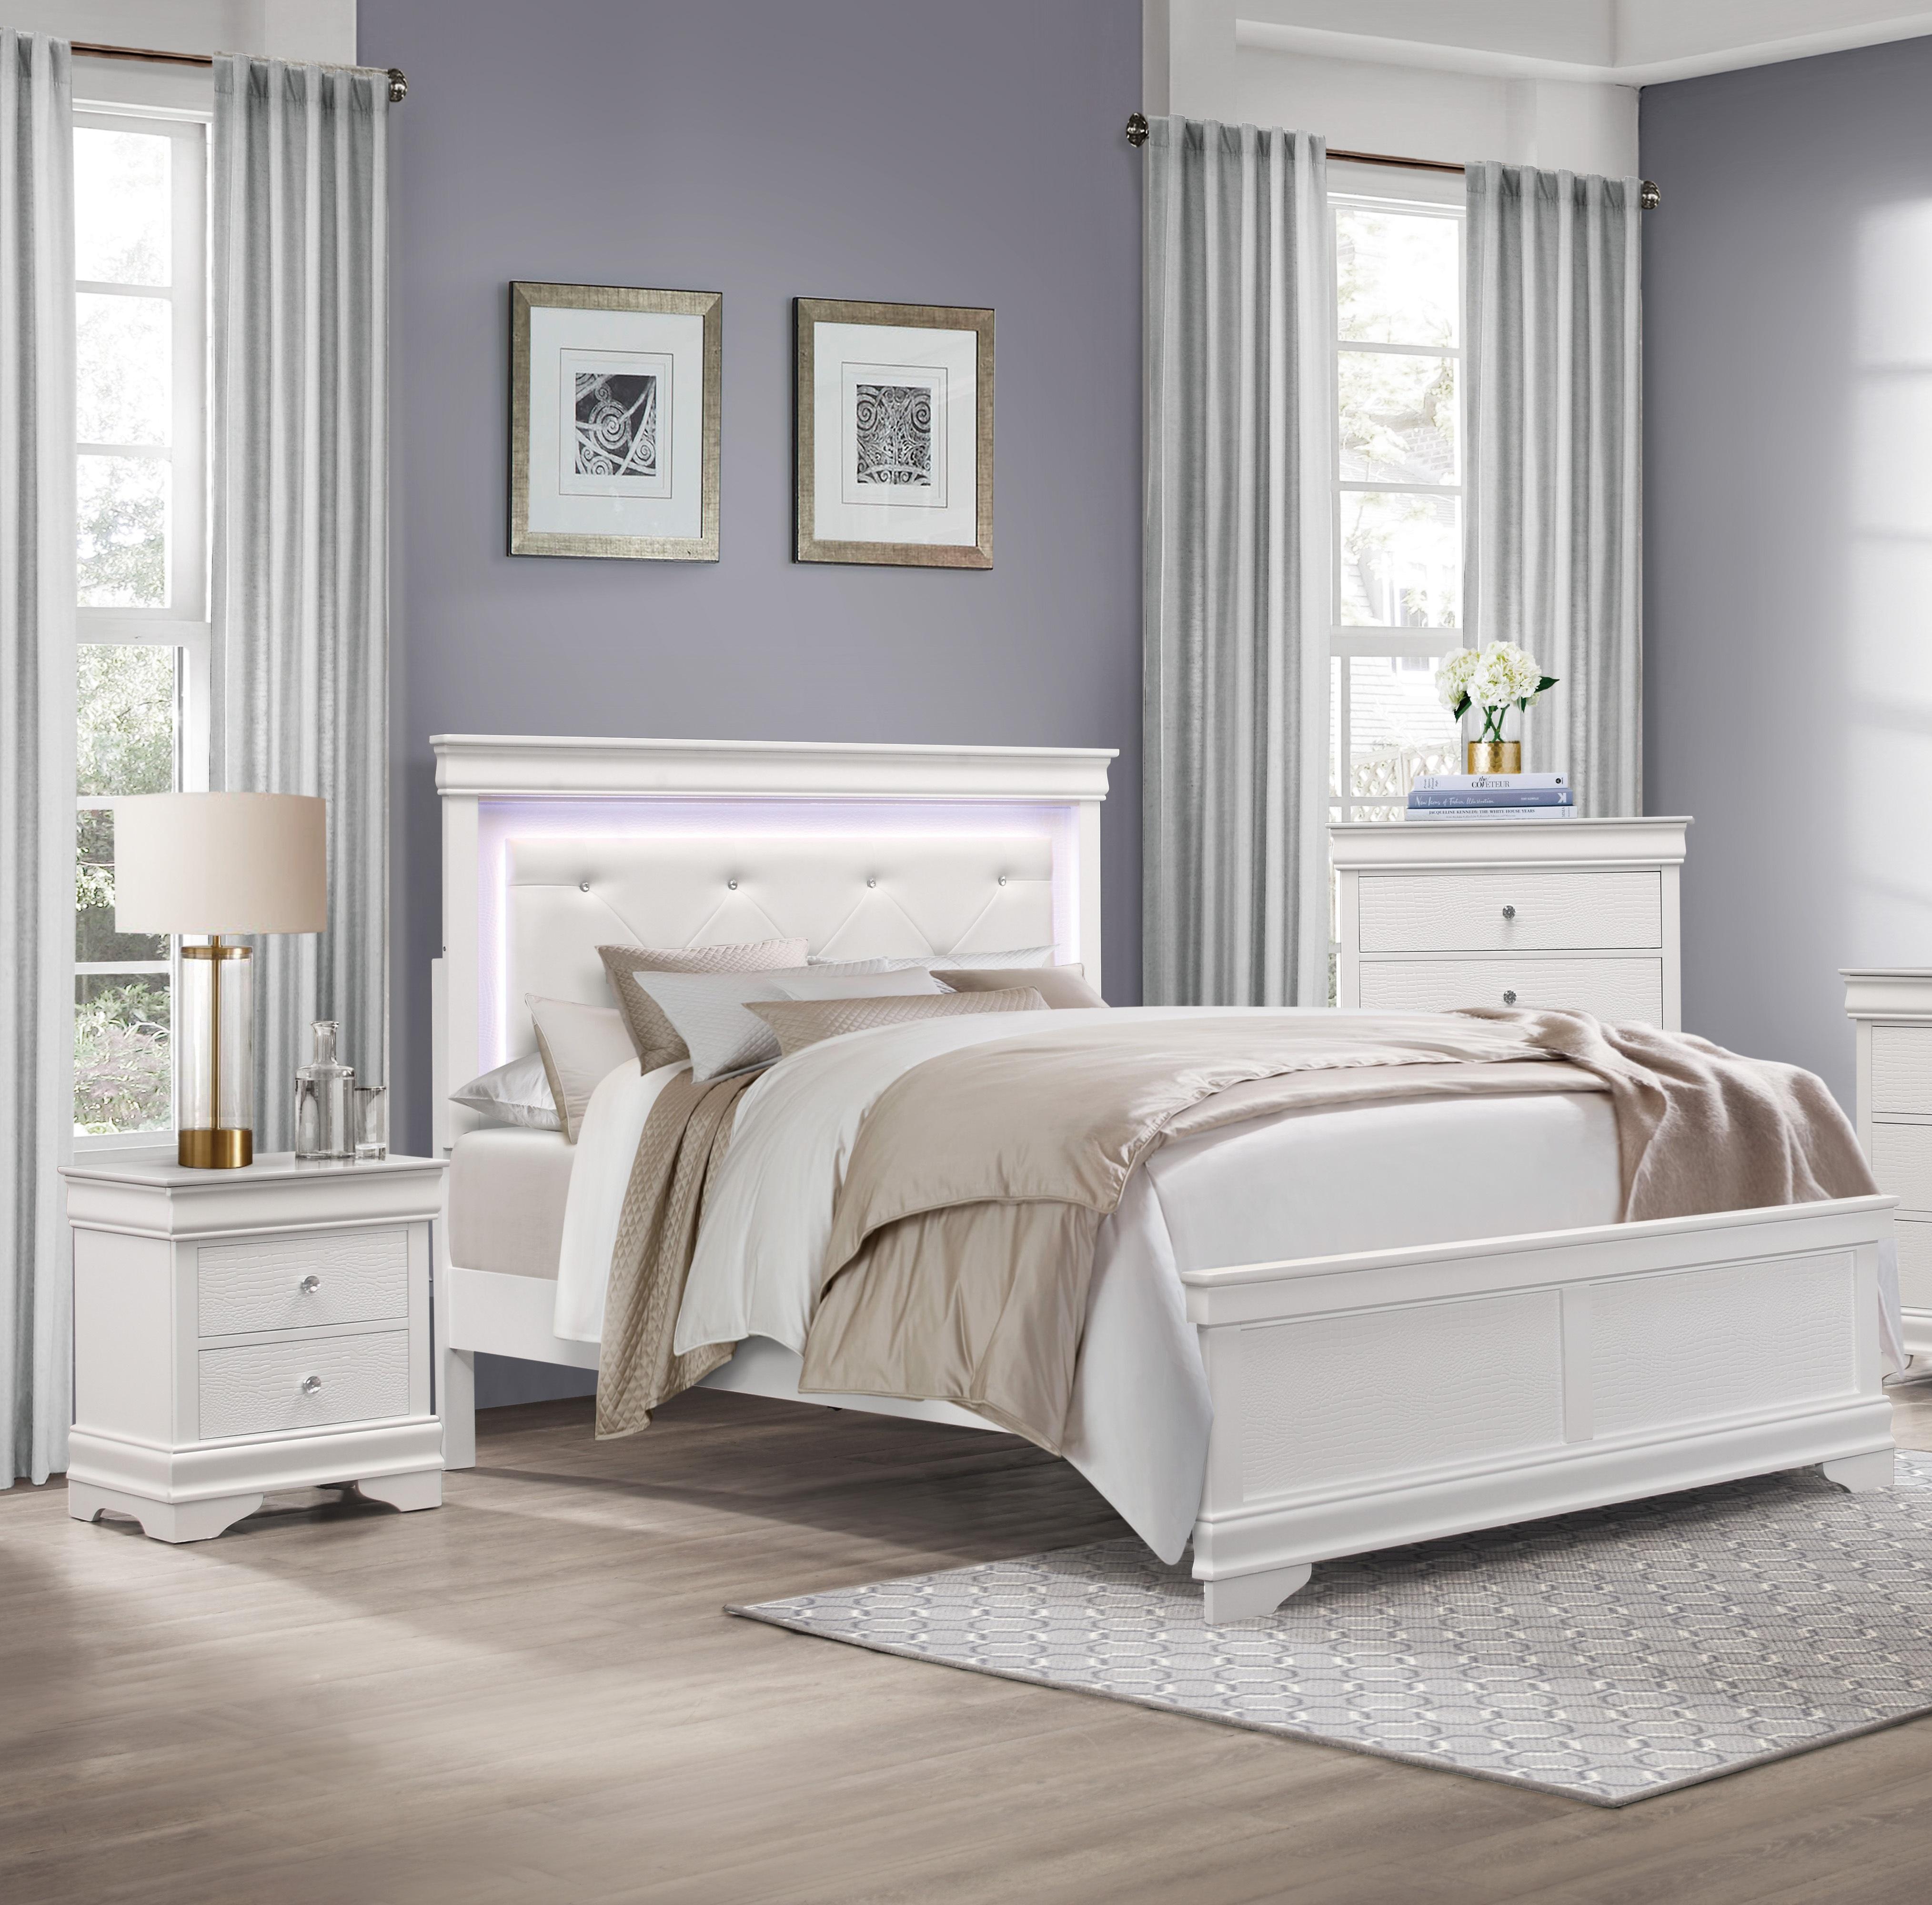 Traditional Bedroom Set 1556WT-1-3PC Lana 1556WT-1-3PC in White Faux Leather